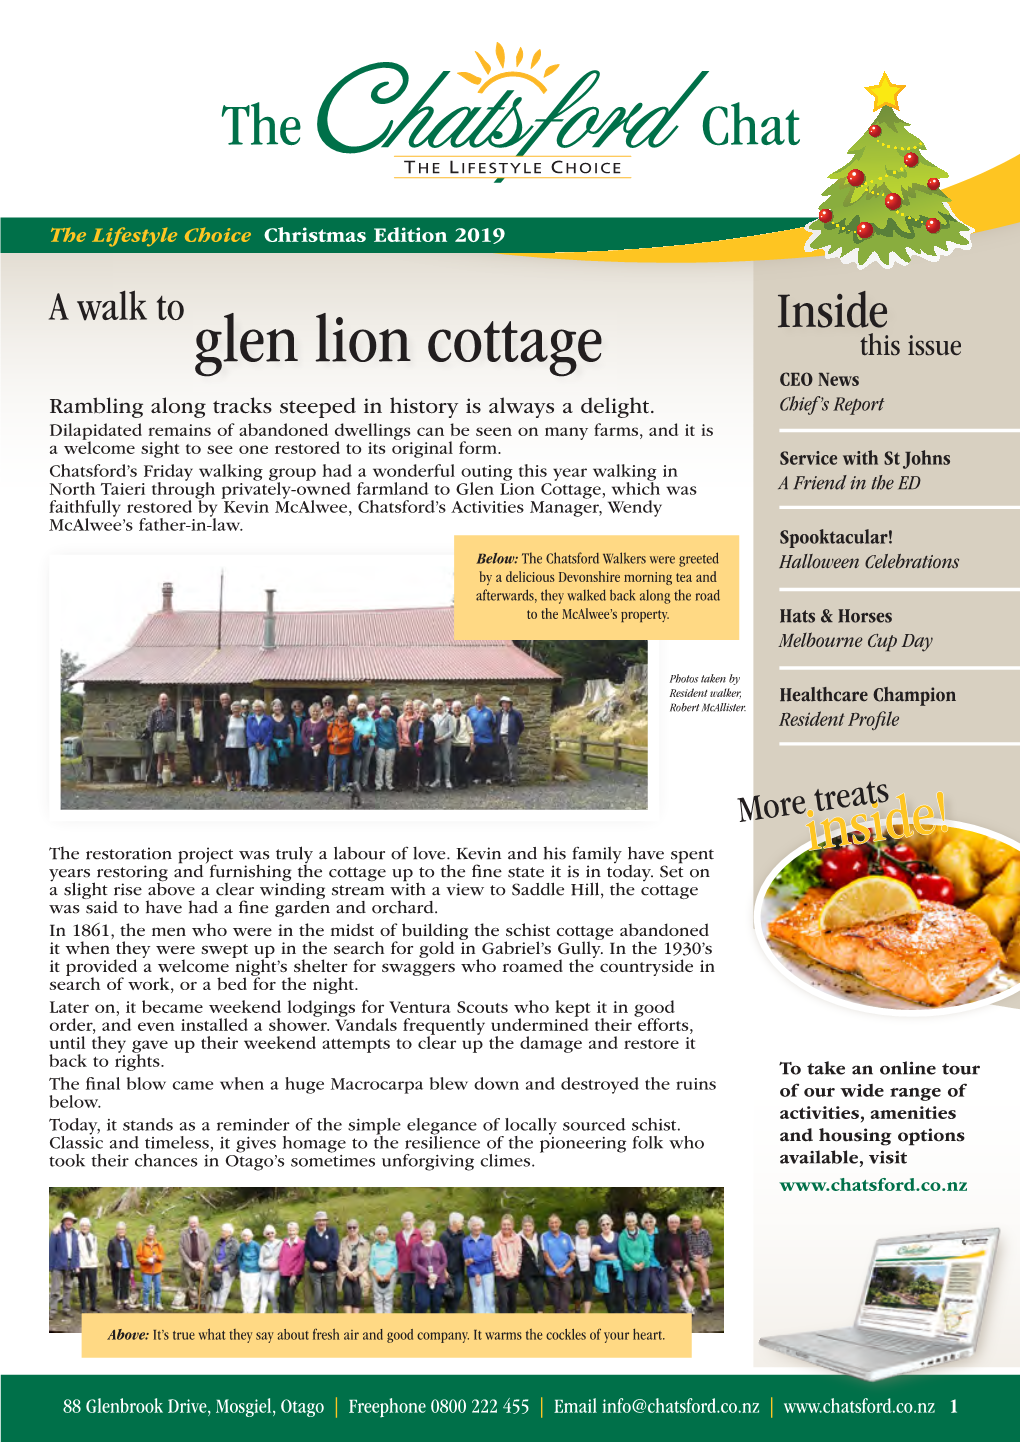 Glen Lion Cottage This Issue CEO News Rambling Along Tracks Steeped in History Is Always a Delight